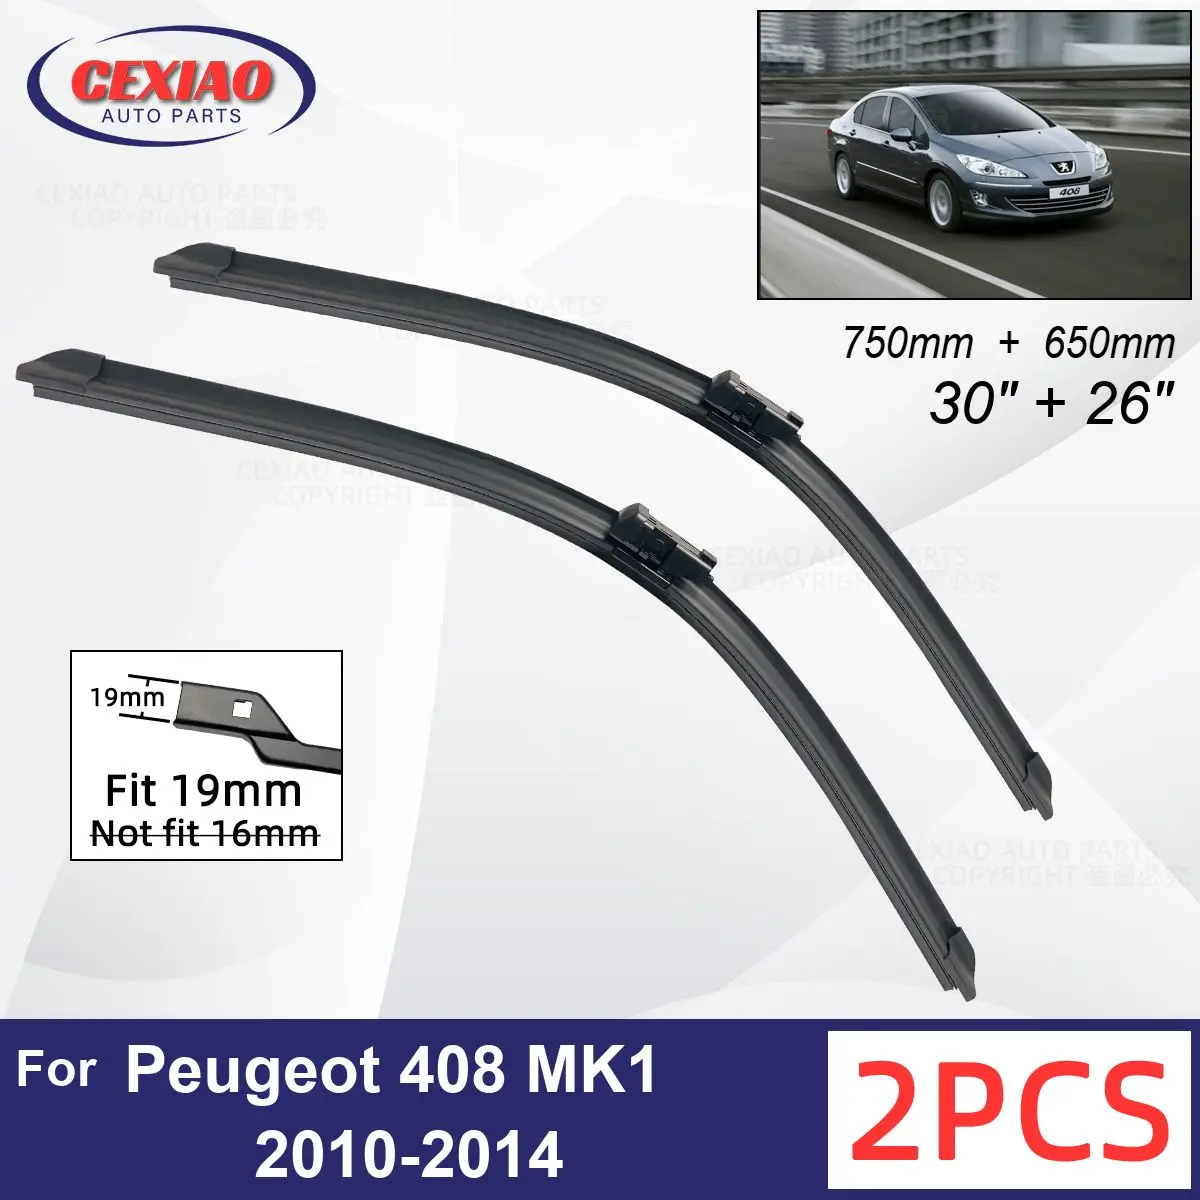 

Car Wiper For Peugeot 408 MK1 2010-2014 Front Wiper Blades Soft Rubber Windscreen Wipers Auto Windshield 30"+26" 750mm + 650mm